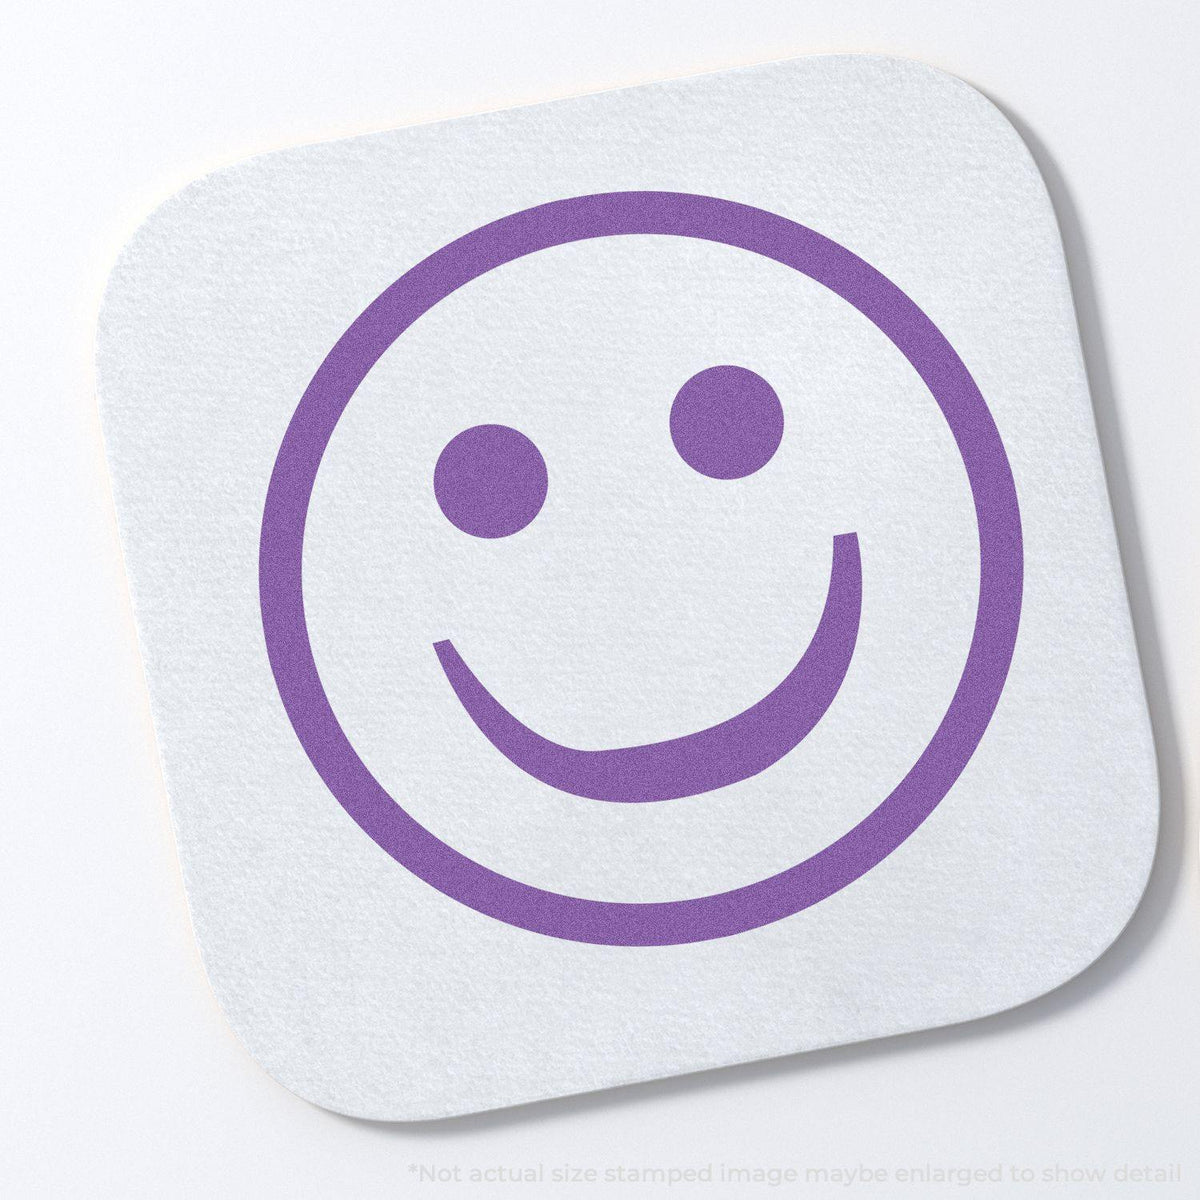 In Use Photo of Round Violet Smiley Face Xstamper Stamp